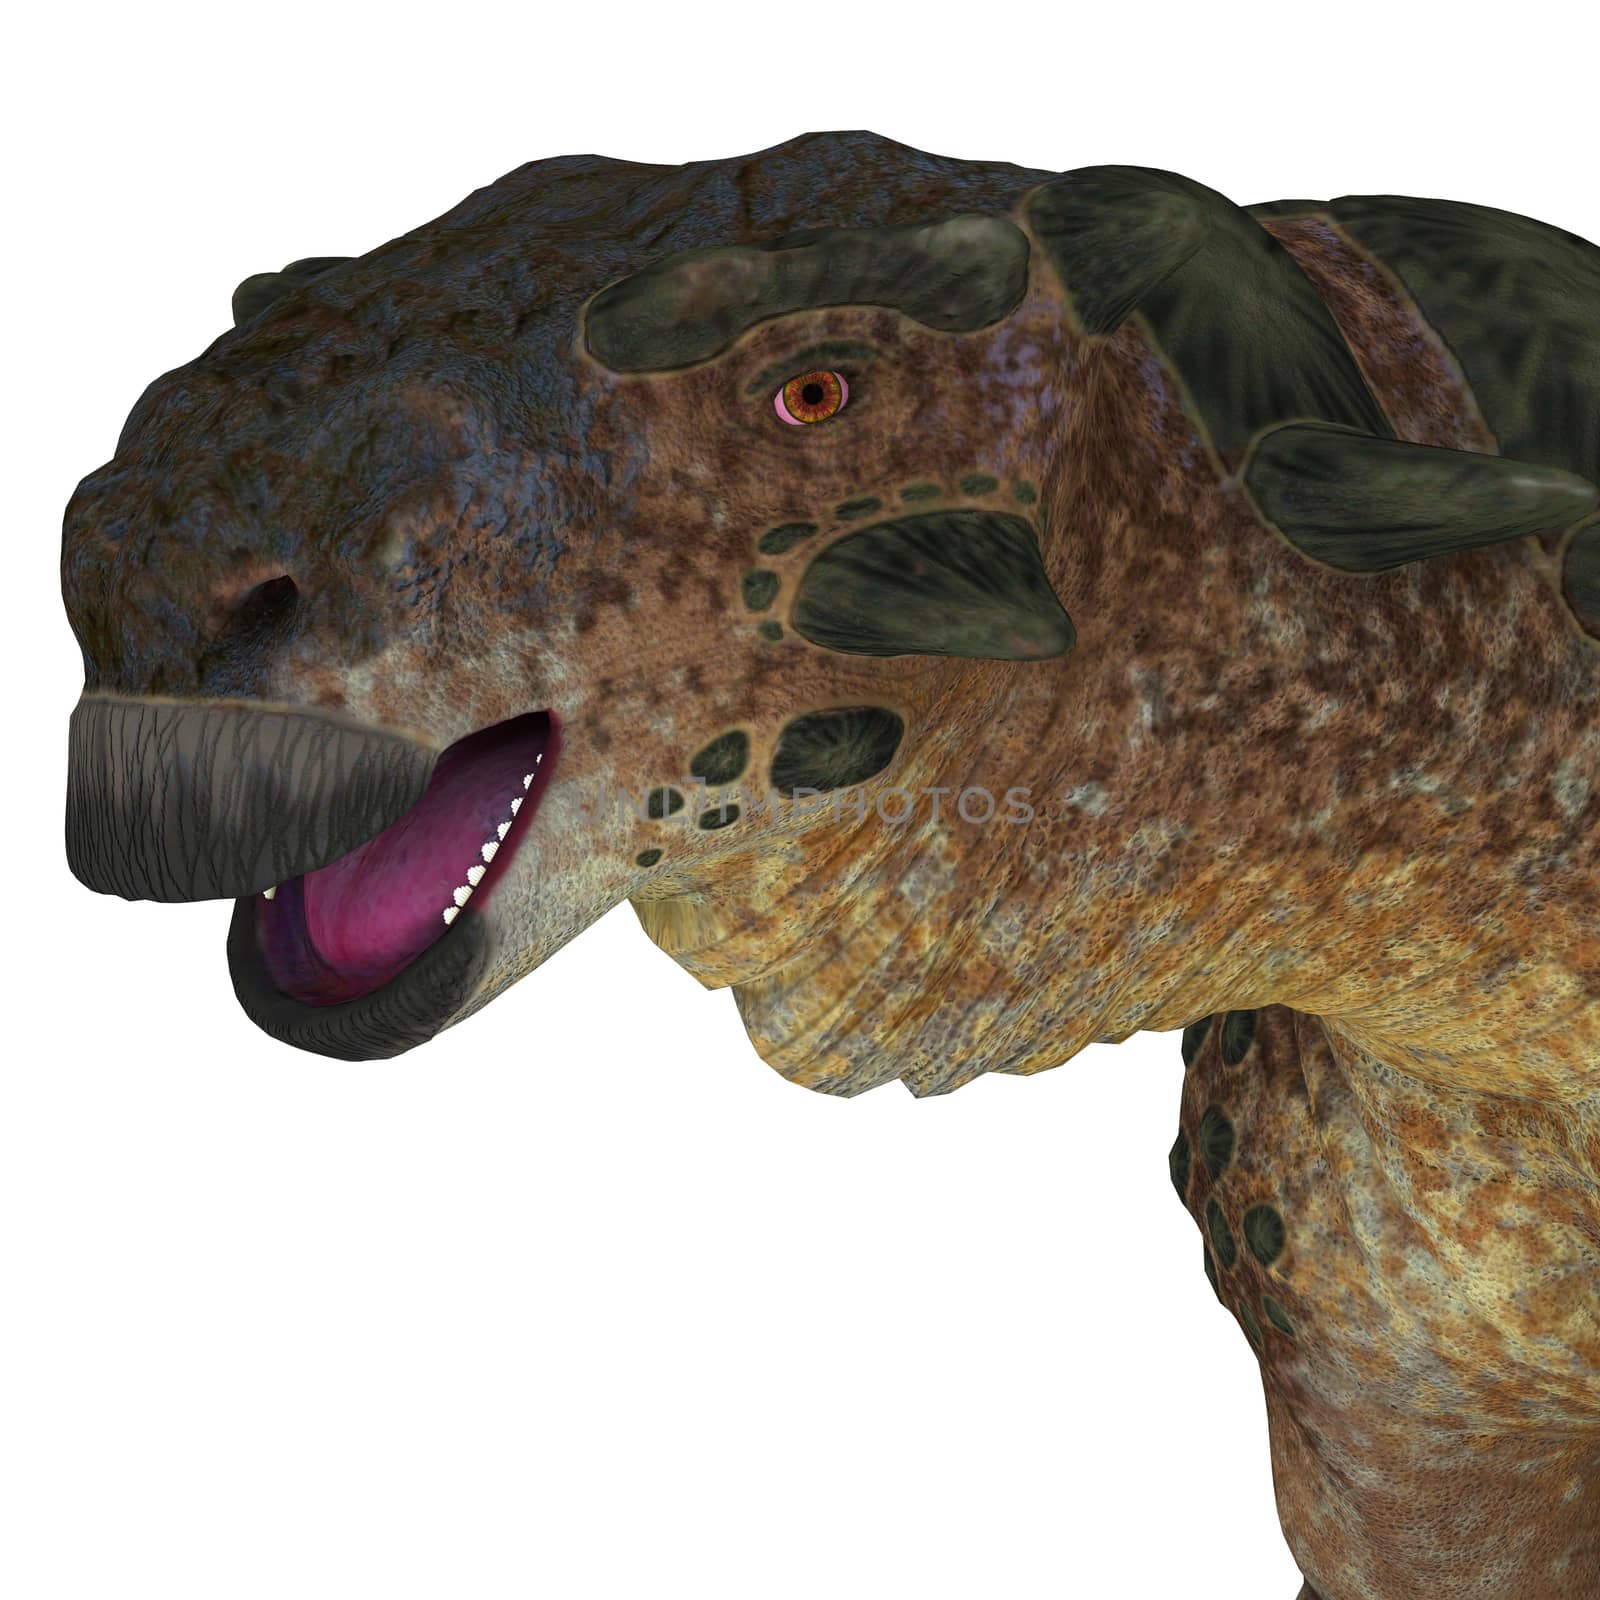 Pinacosaurus was a herbivorous ankylosaur that lived in the Cretaceous Period of Mongolia and China.